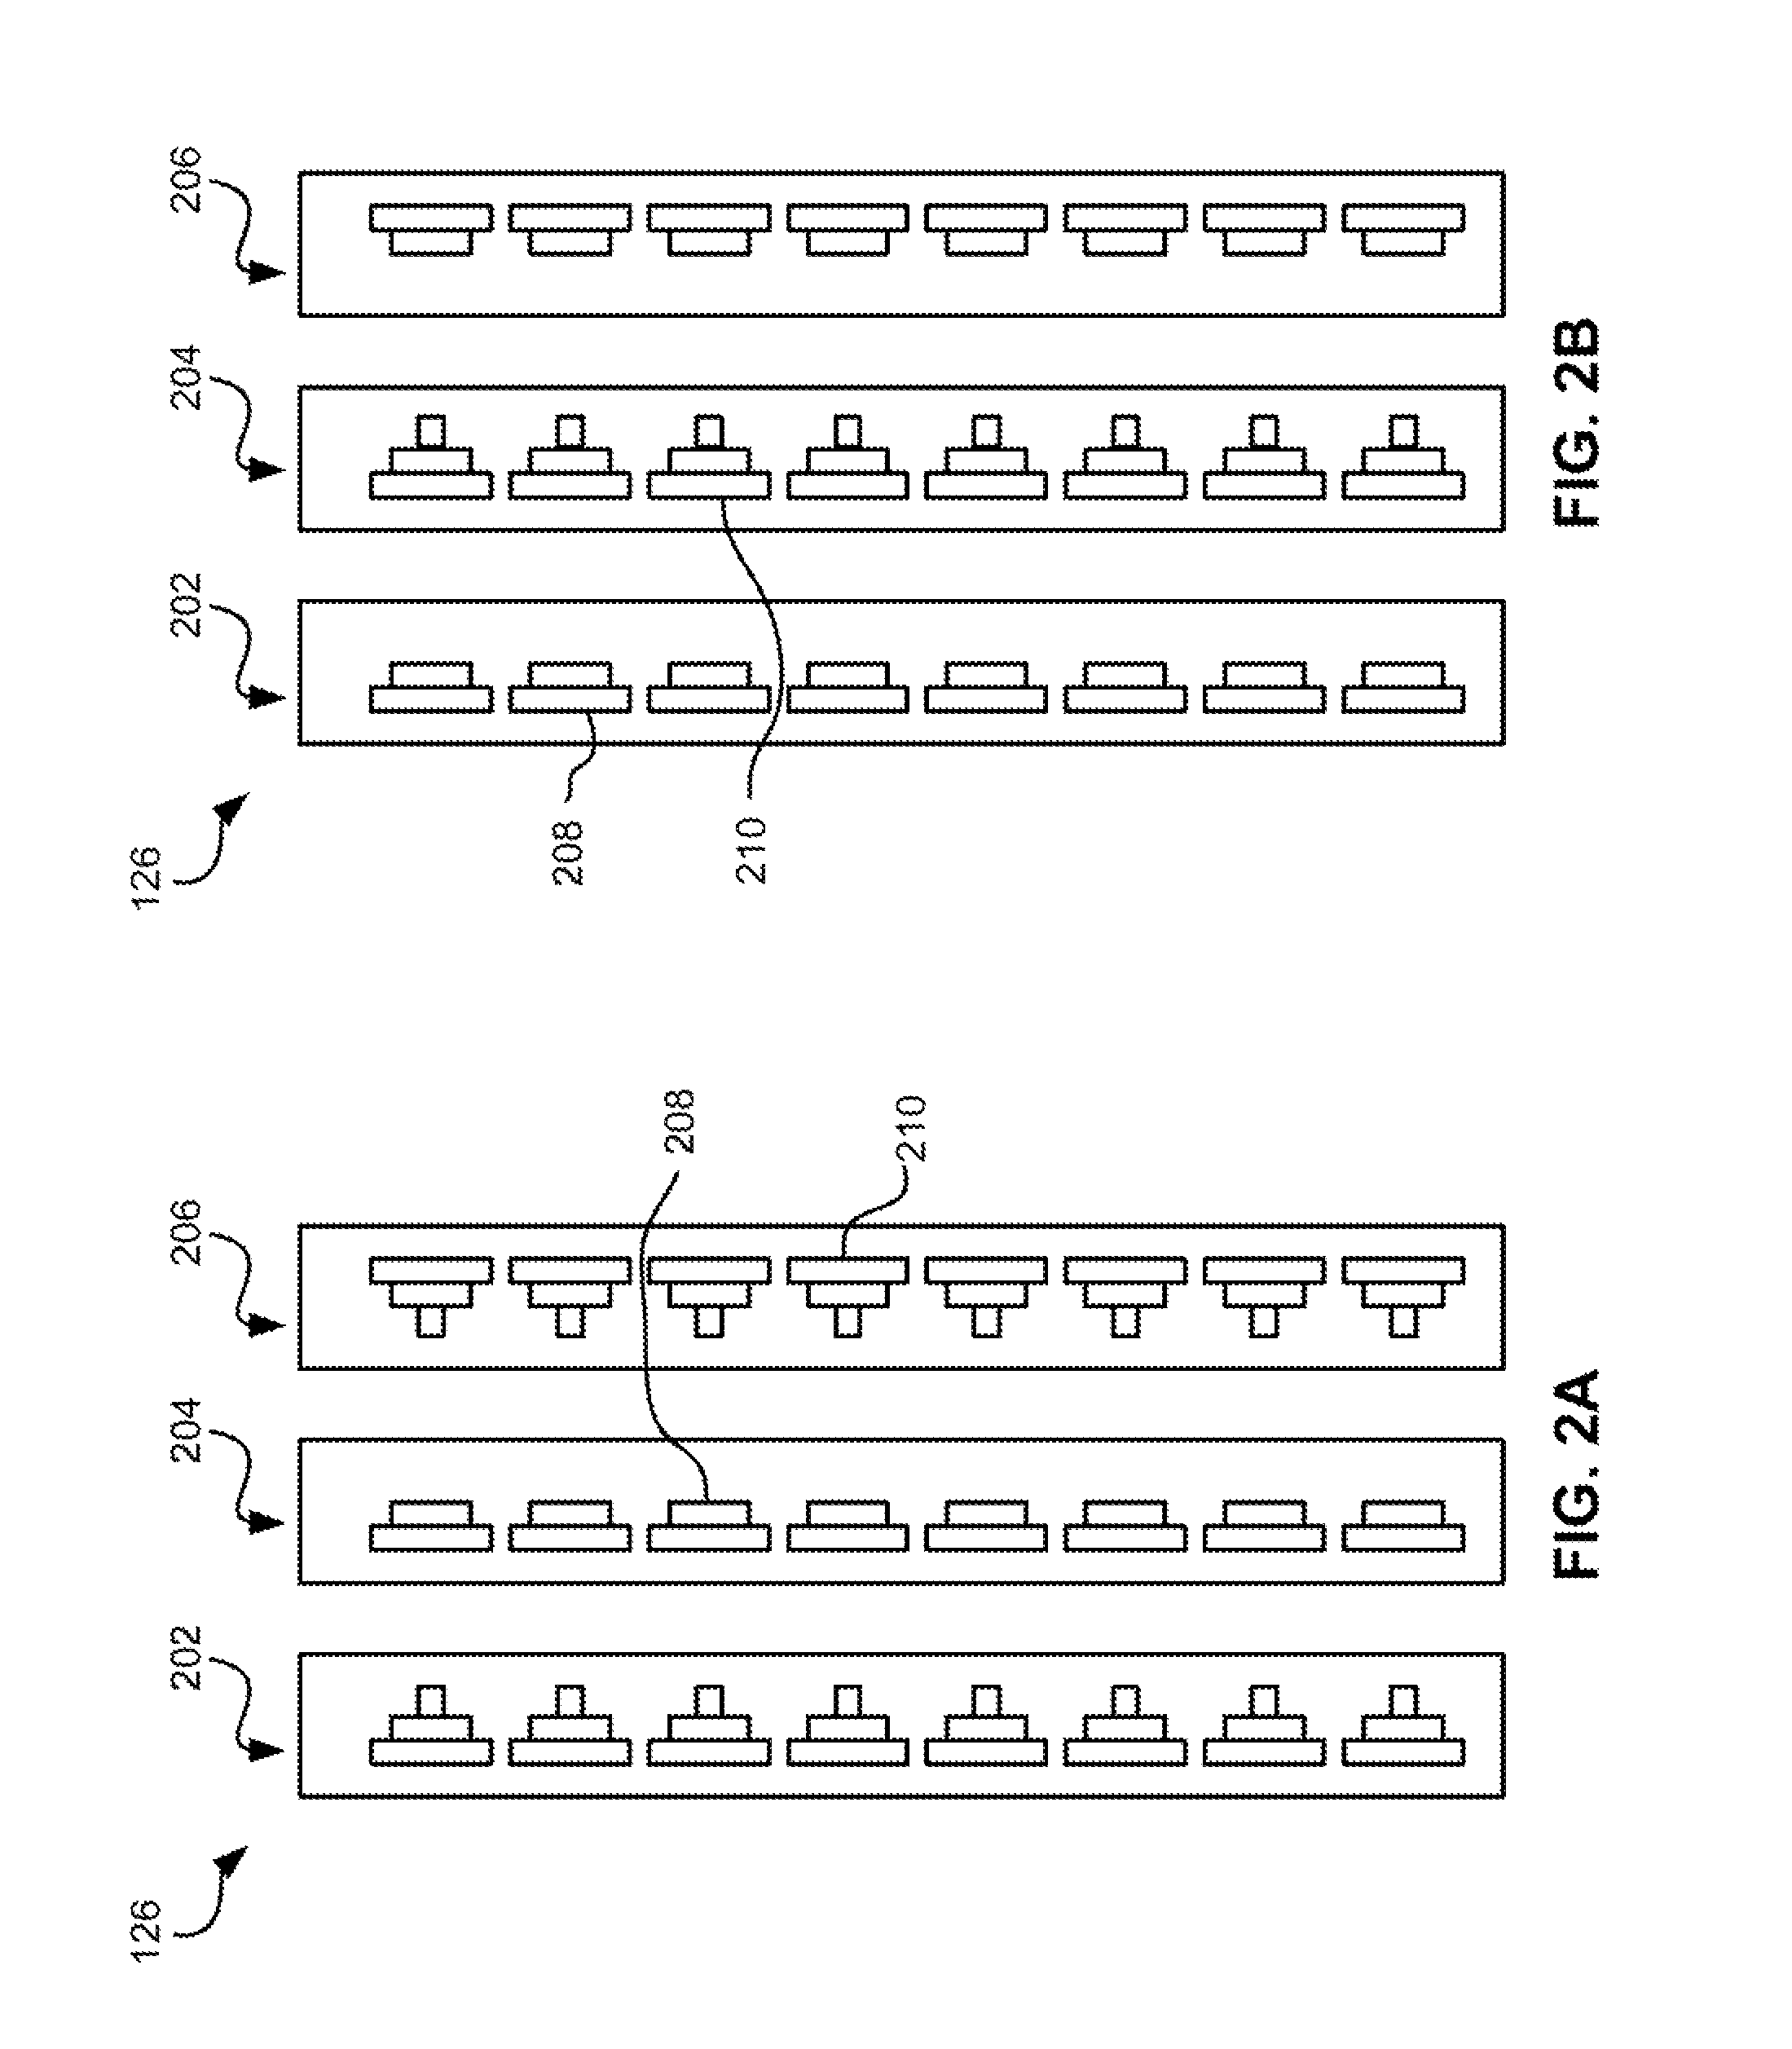 Low friction tape head and system implementing same